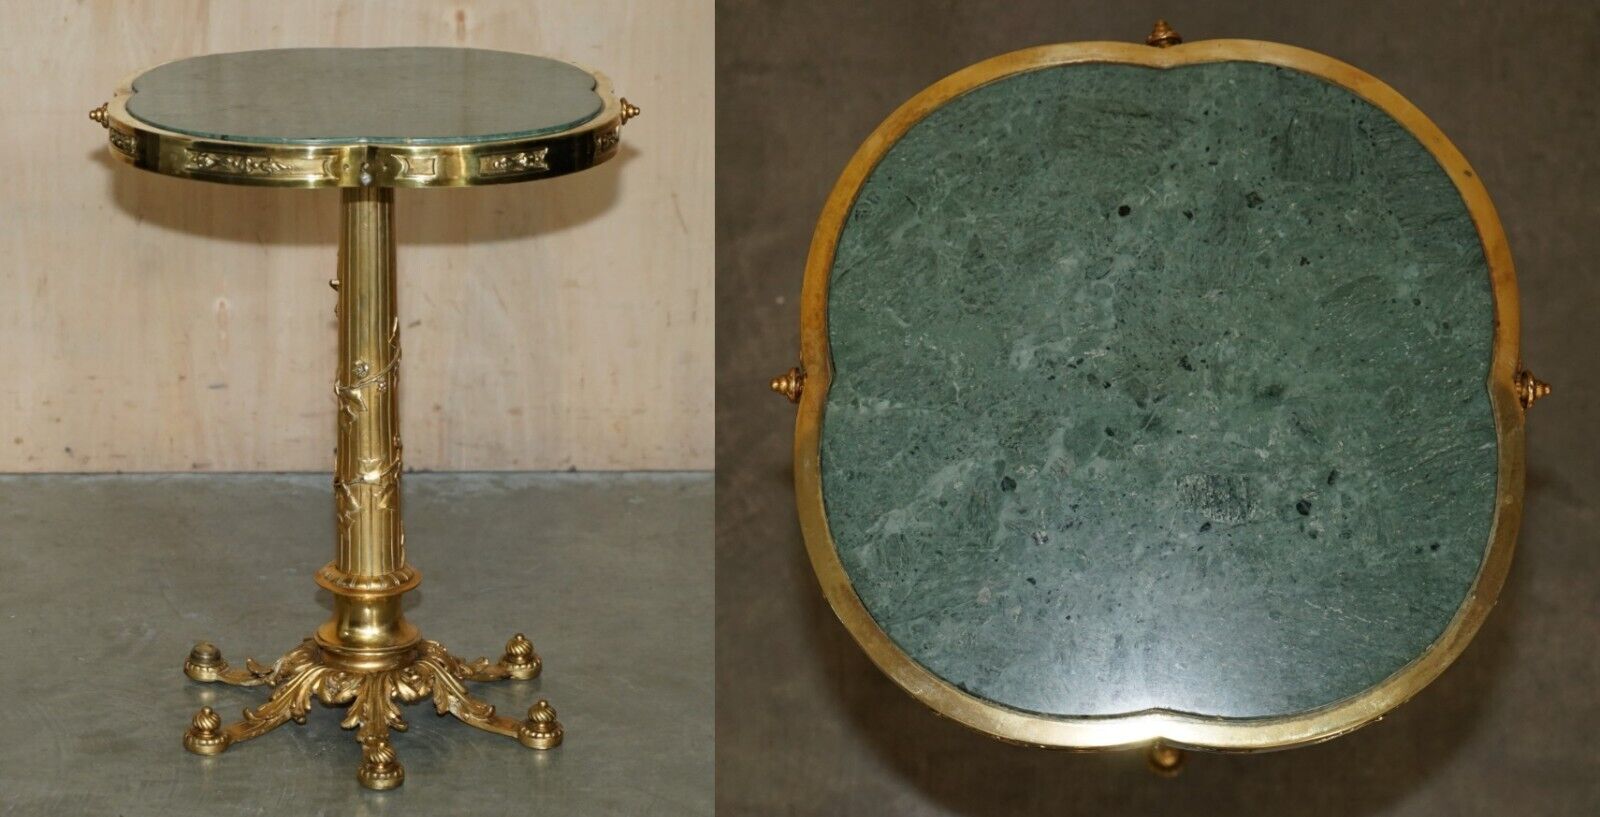 EXQUISITE ANTIQUE CIRCA 1900 BRASS SIDE END LAMP TABLE WITH THICK MARBLE TOP